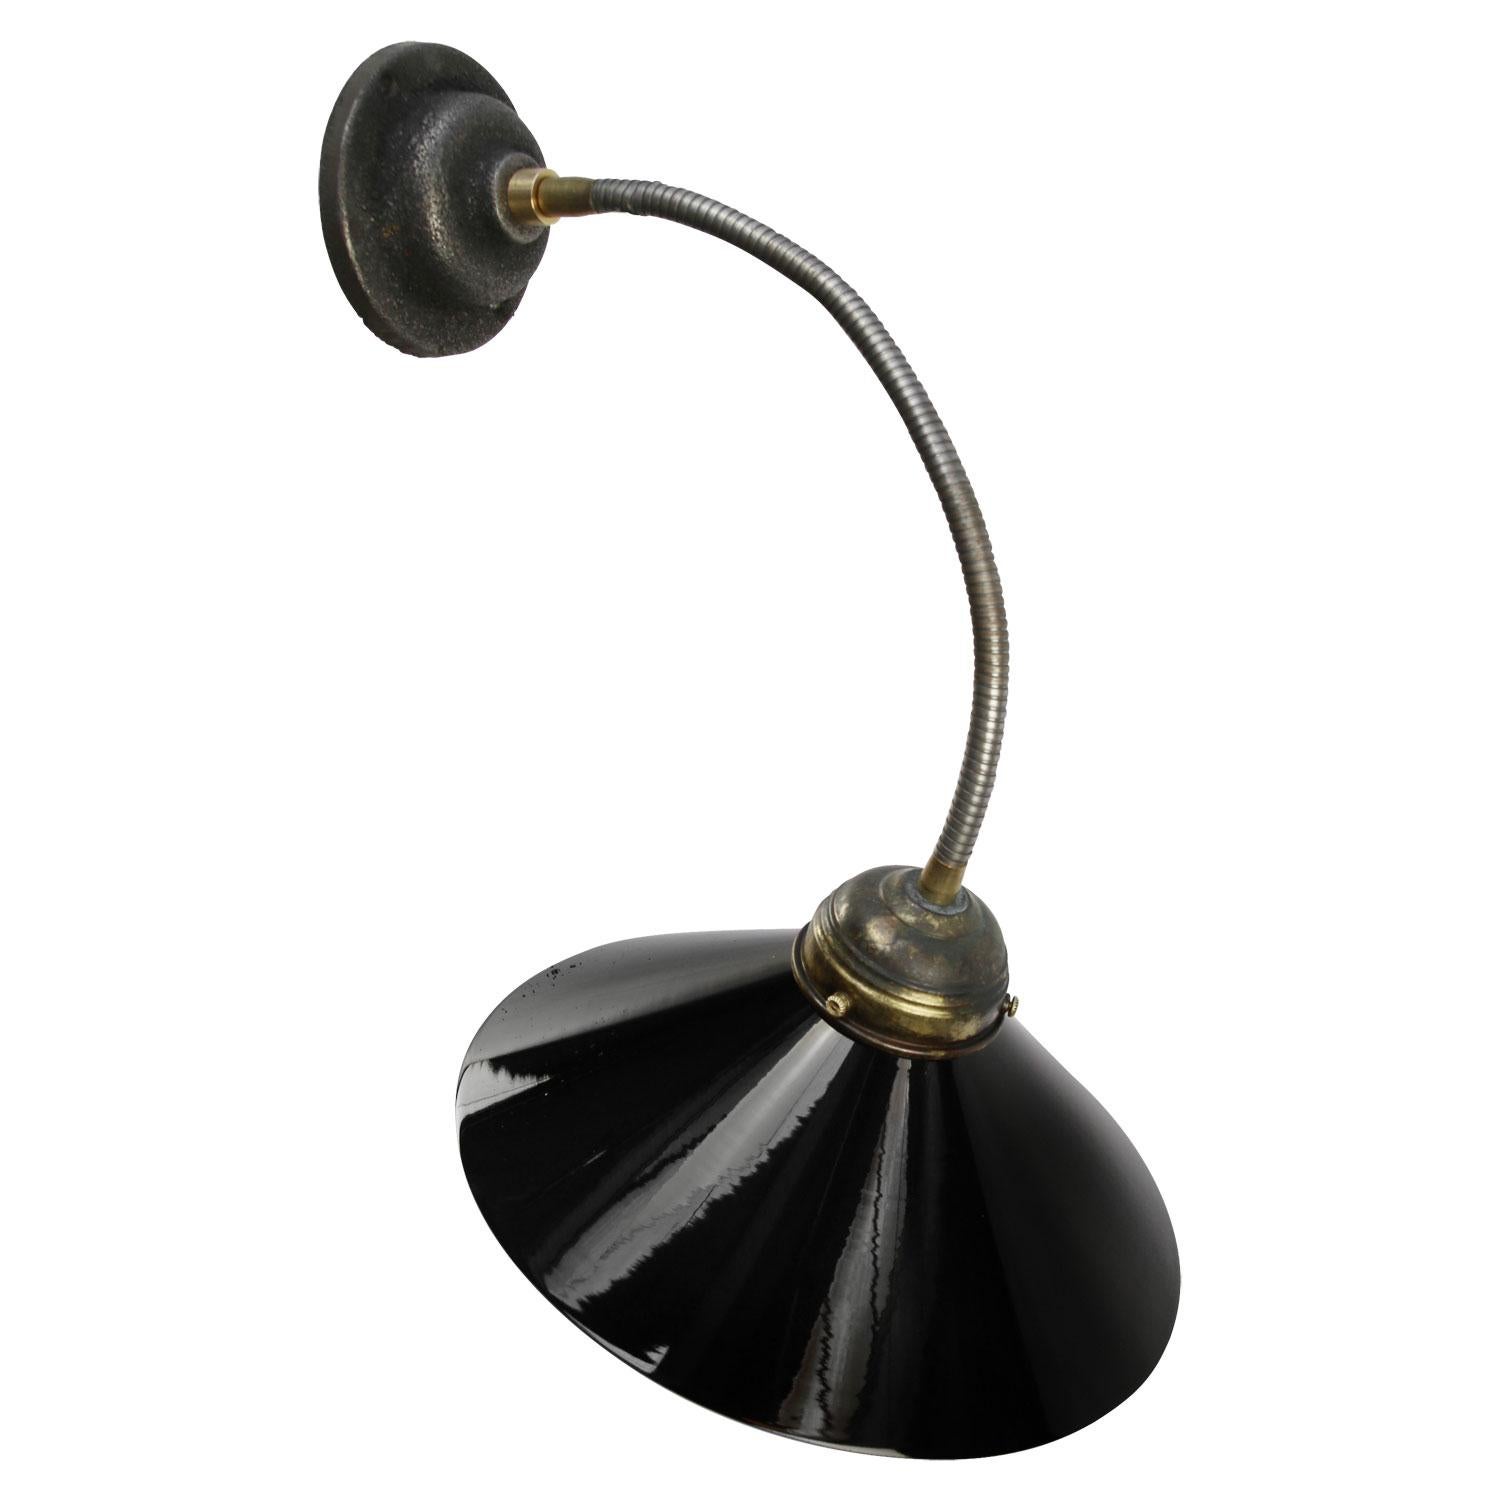 Wall light spot.
Black opaline glass shade.
Goose neck arm
Adjustable in height and angle.

Measures: Diameter cast iron wall mount 10 cm.

Weight: 1.50 kg / 3.3 lb

Priced per individual item. All lamps have been made suitable by